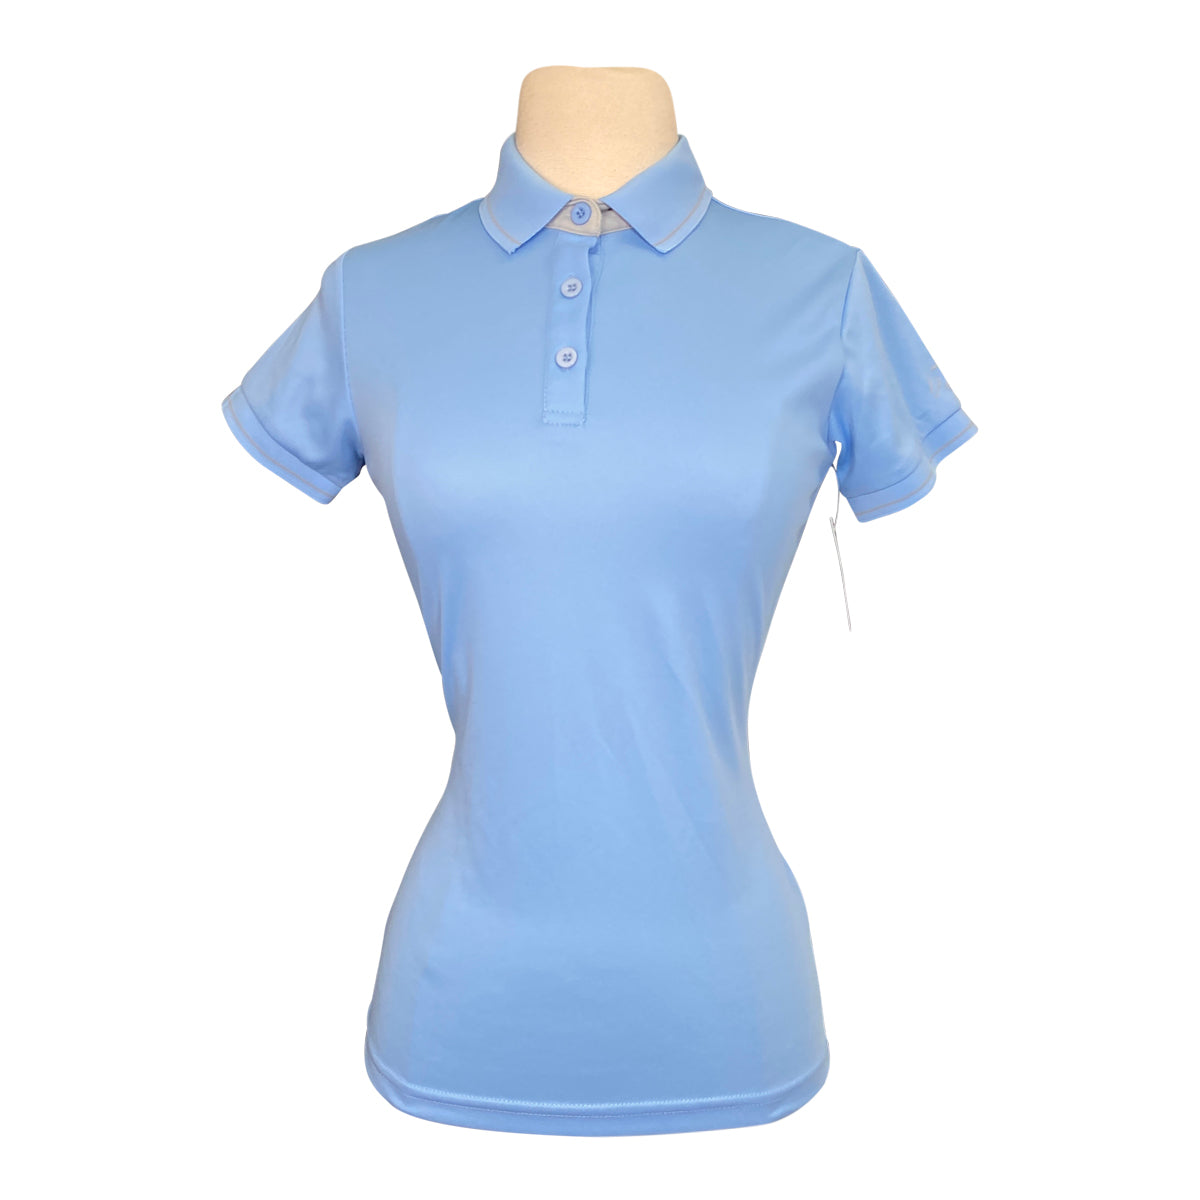 HKM 'Classico' Sleeveless Polo Shirt in Light Blue w/Grey Accents